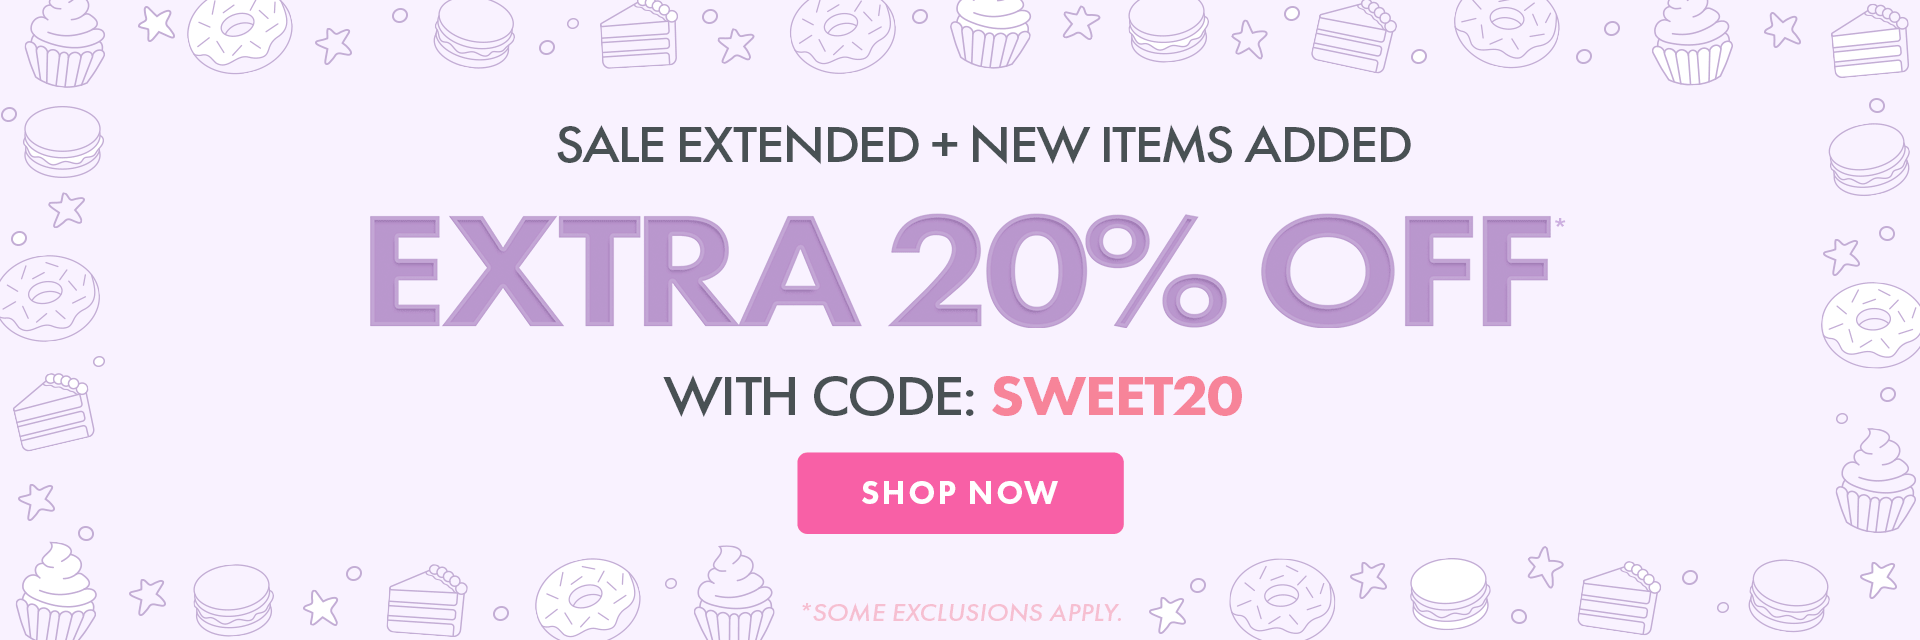 Save 20% Off with code: SWEET20